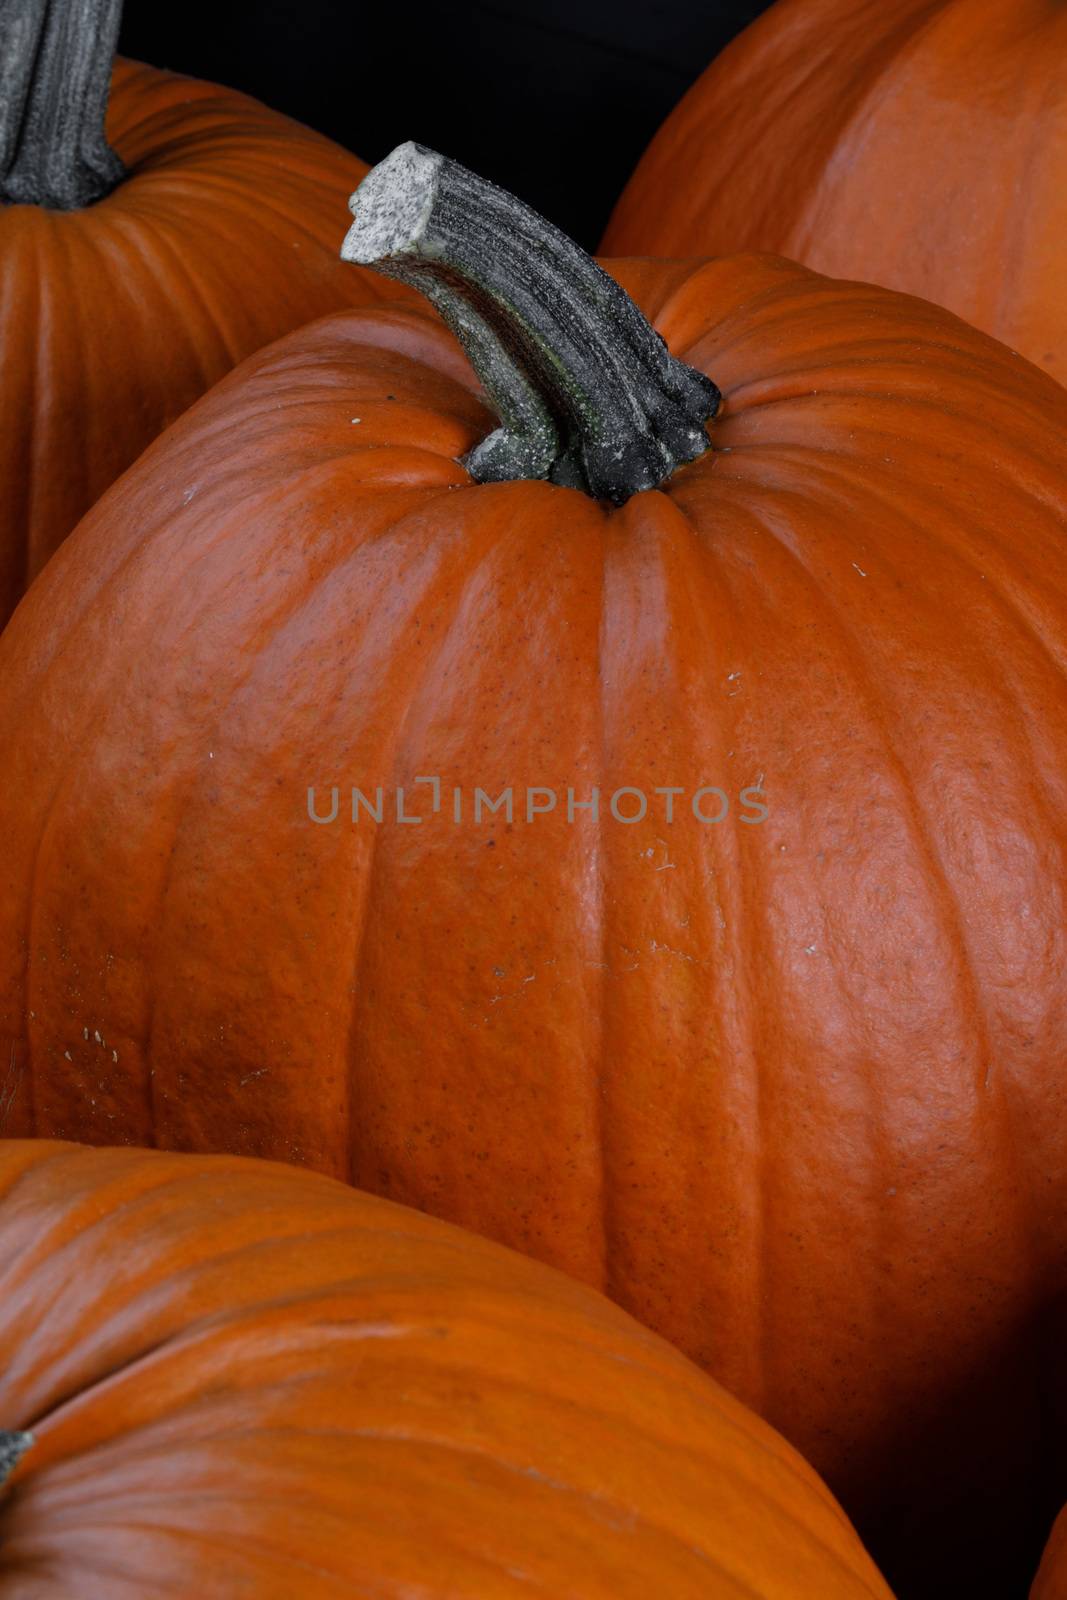 Many pumpkins collection on the autumn market